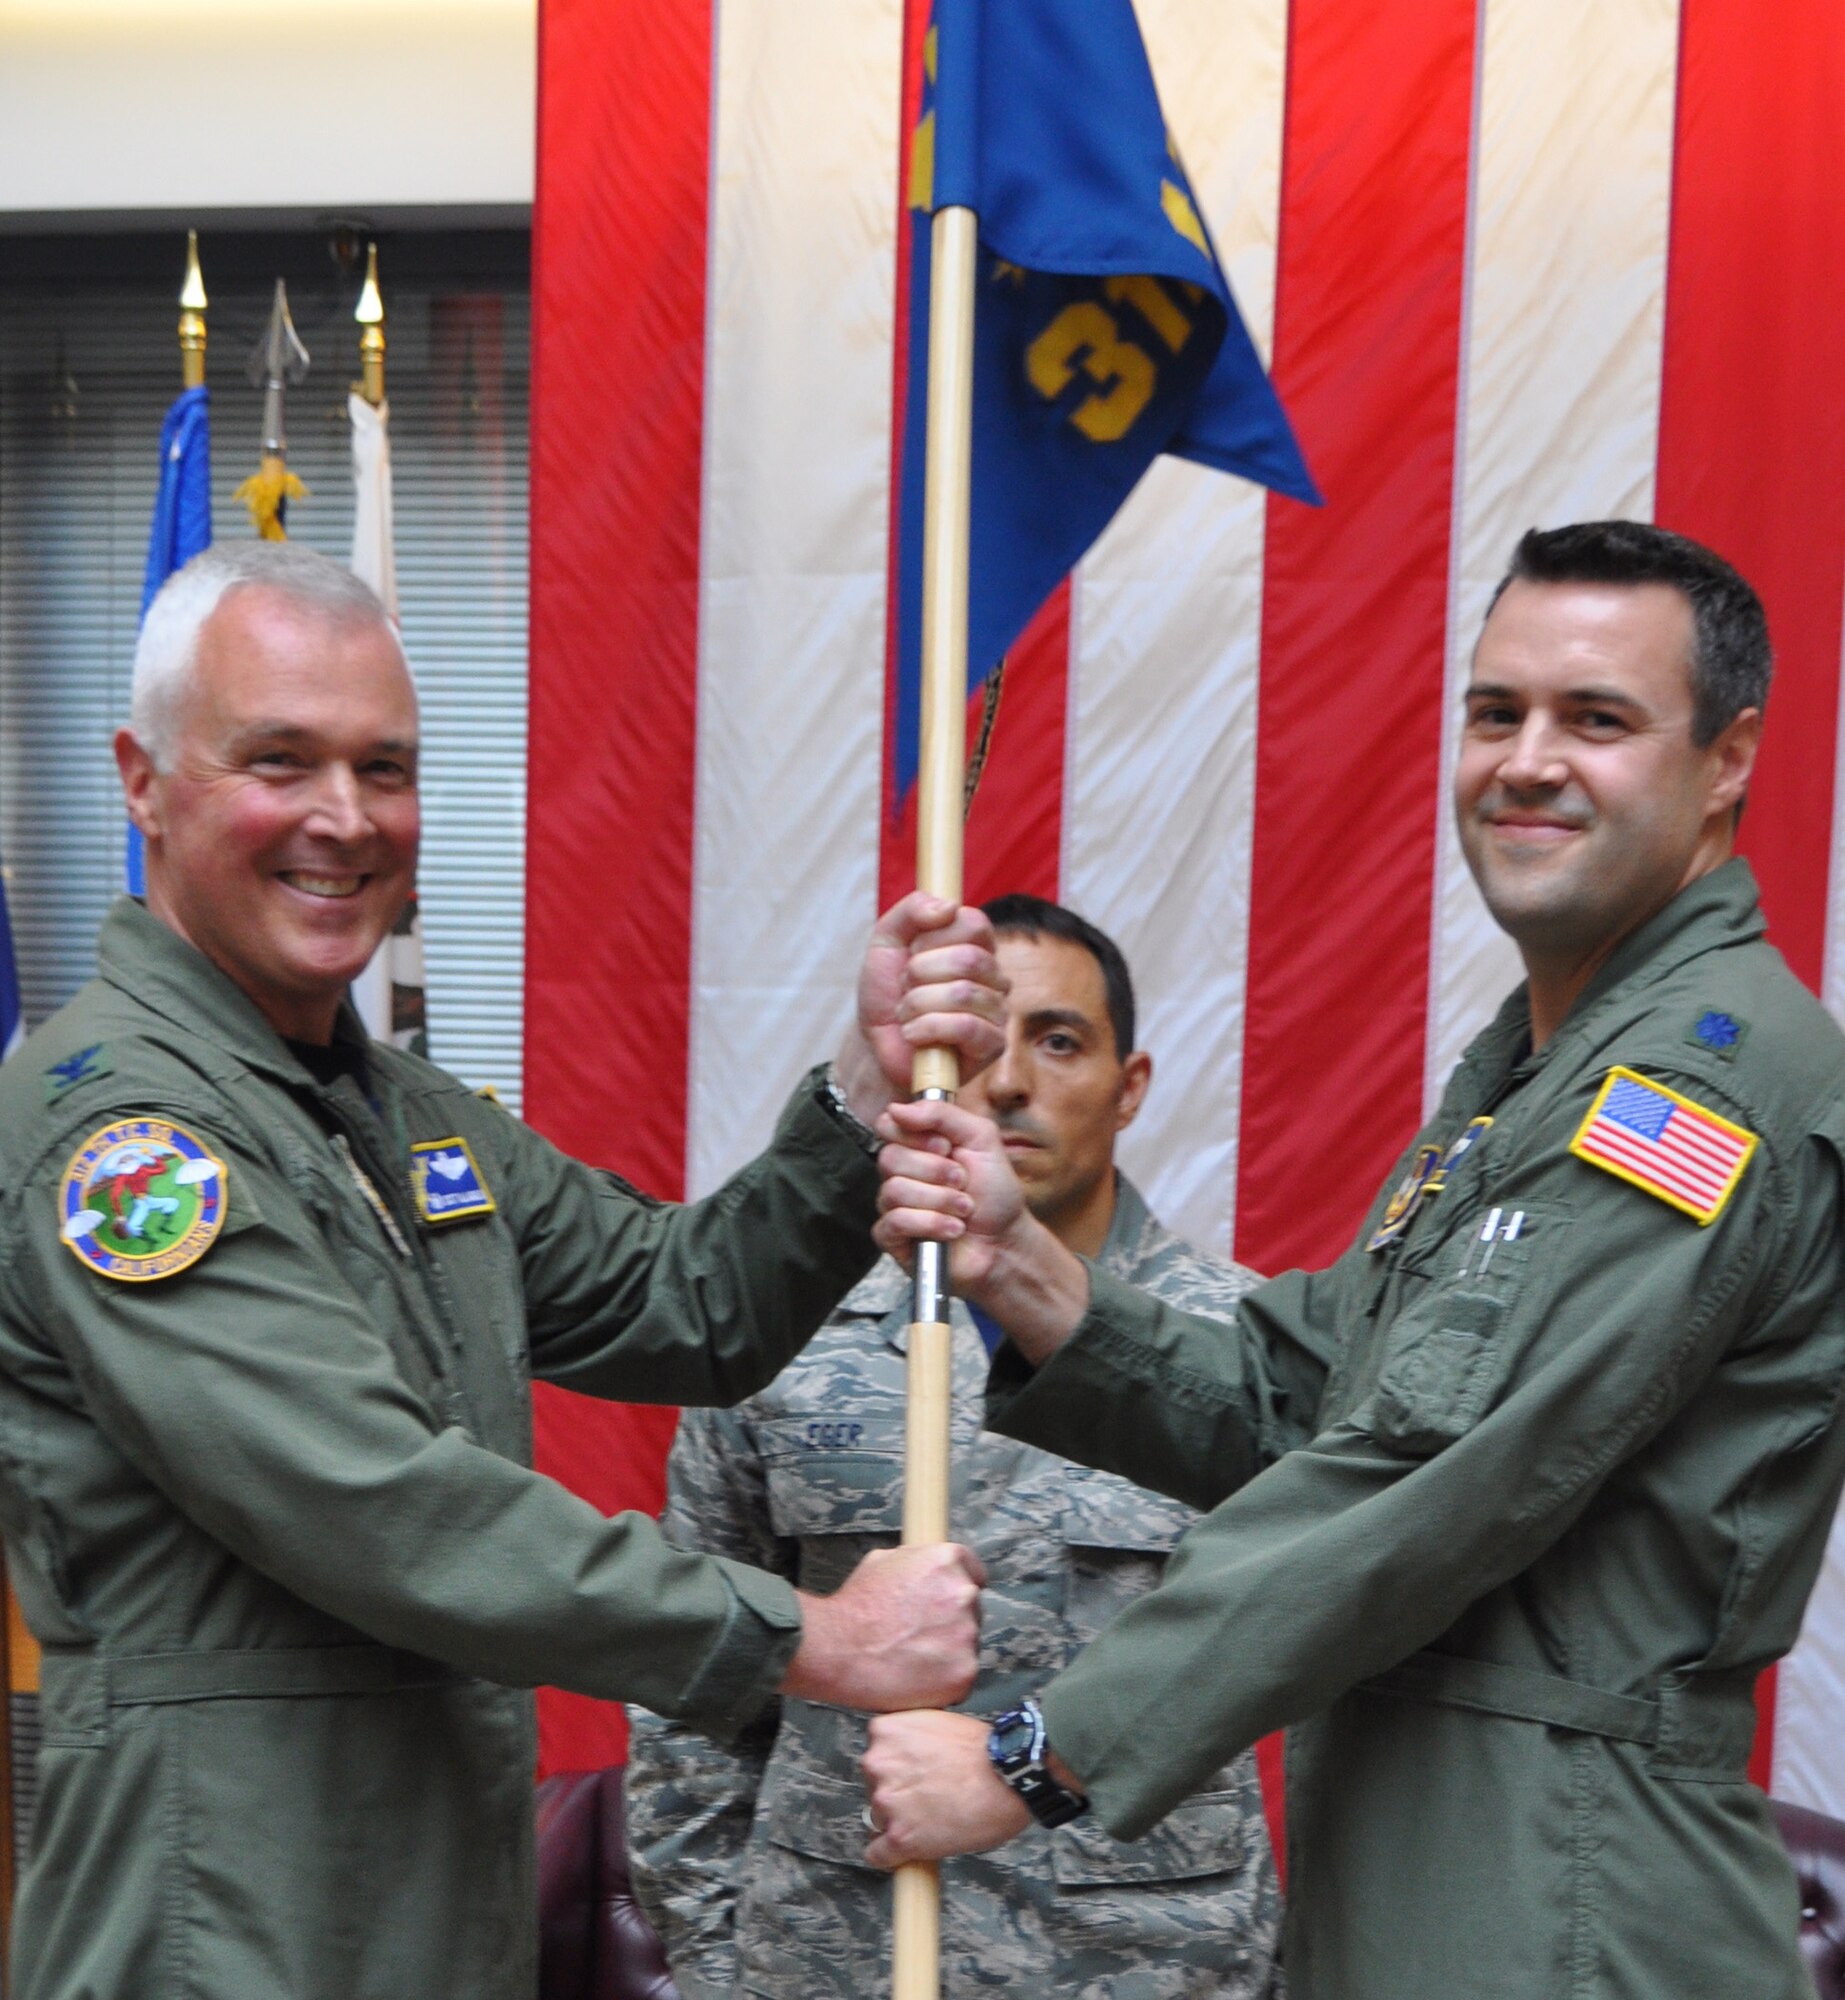 TRAVIS AIR FORCE BASE, Calif. -- As the incoming commander, Lt. Col. Dan Stout steps up, and accepts the 312th AS flag from Col. Scott McLaughlin, thus accepting command. Stout flew B-52 Stratofortress bombers at Barksdale Air Force Base, Lousiana, and the B-2 Spirit stealth bomber at Whiteman AFB, Missouri, prior to joining the 349th Air Mobility Wing here. Lane has been selected for promotion to colonel, and in-residence professional military education. (U.S. Air Force photo/Ellen Hatfield)